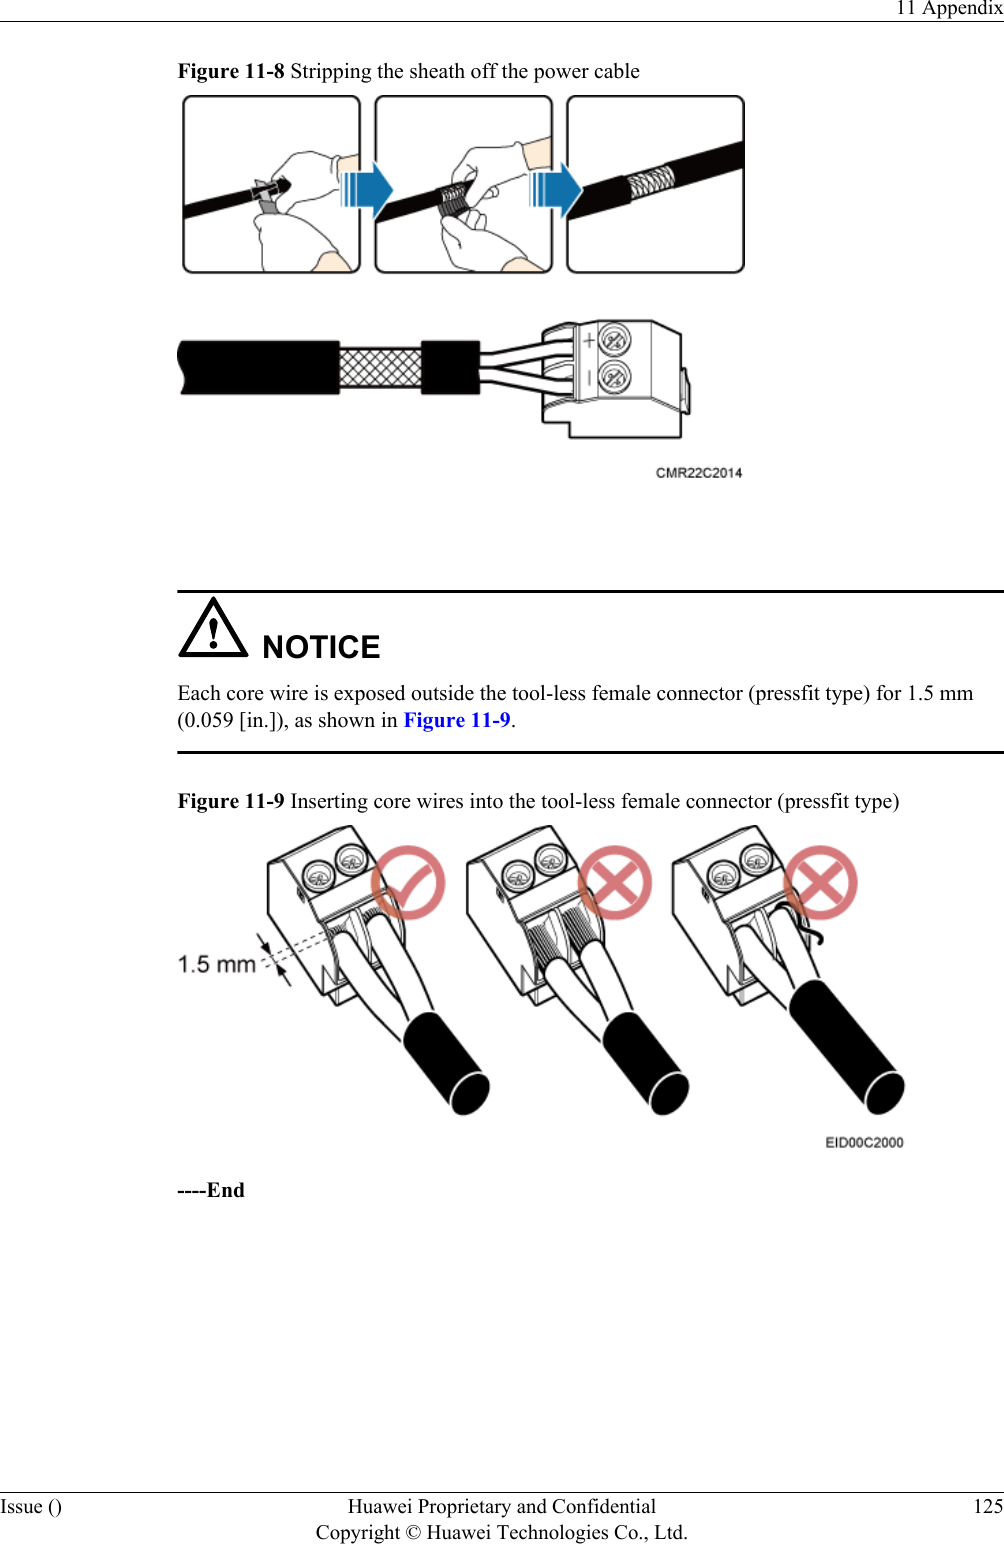 Figure 11-8 Stripping the sheath off the power cable NOTICEEach core wire is exposed outside the tool-less female connector (pressfit type) for 1.5 mm(0.059 [in.]), as shown in Figure 11-9.Figure 11-9 Inserting core wires into the tool-less female connector (pressfit type)----End11 AppendixIssue () Huawei Proprietary and ConfidentialCopyright © Huawei Technologies Co., Ltd.125